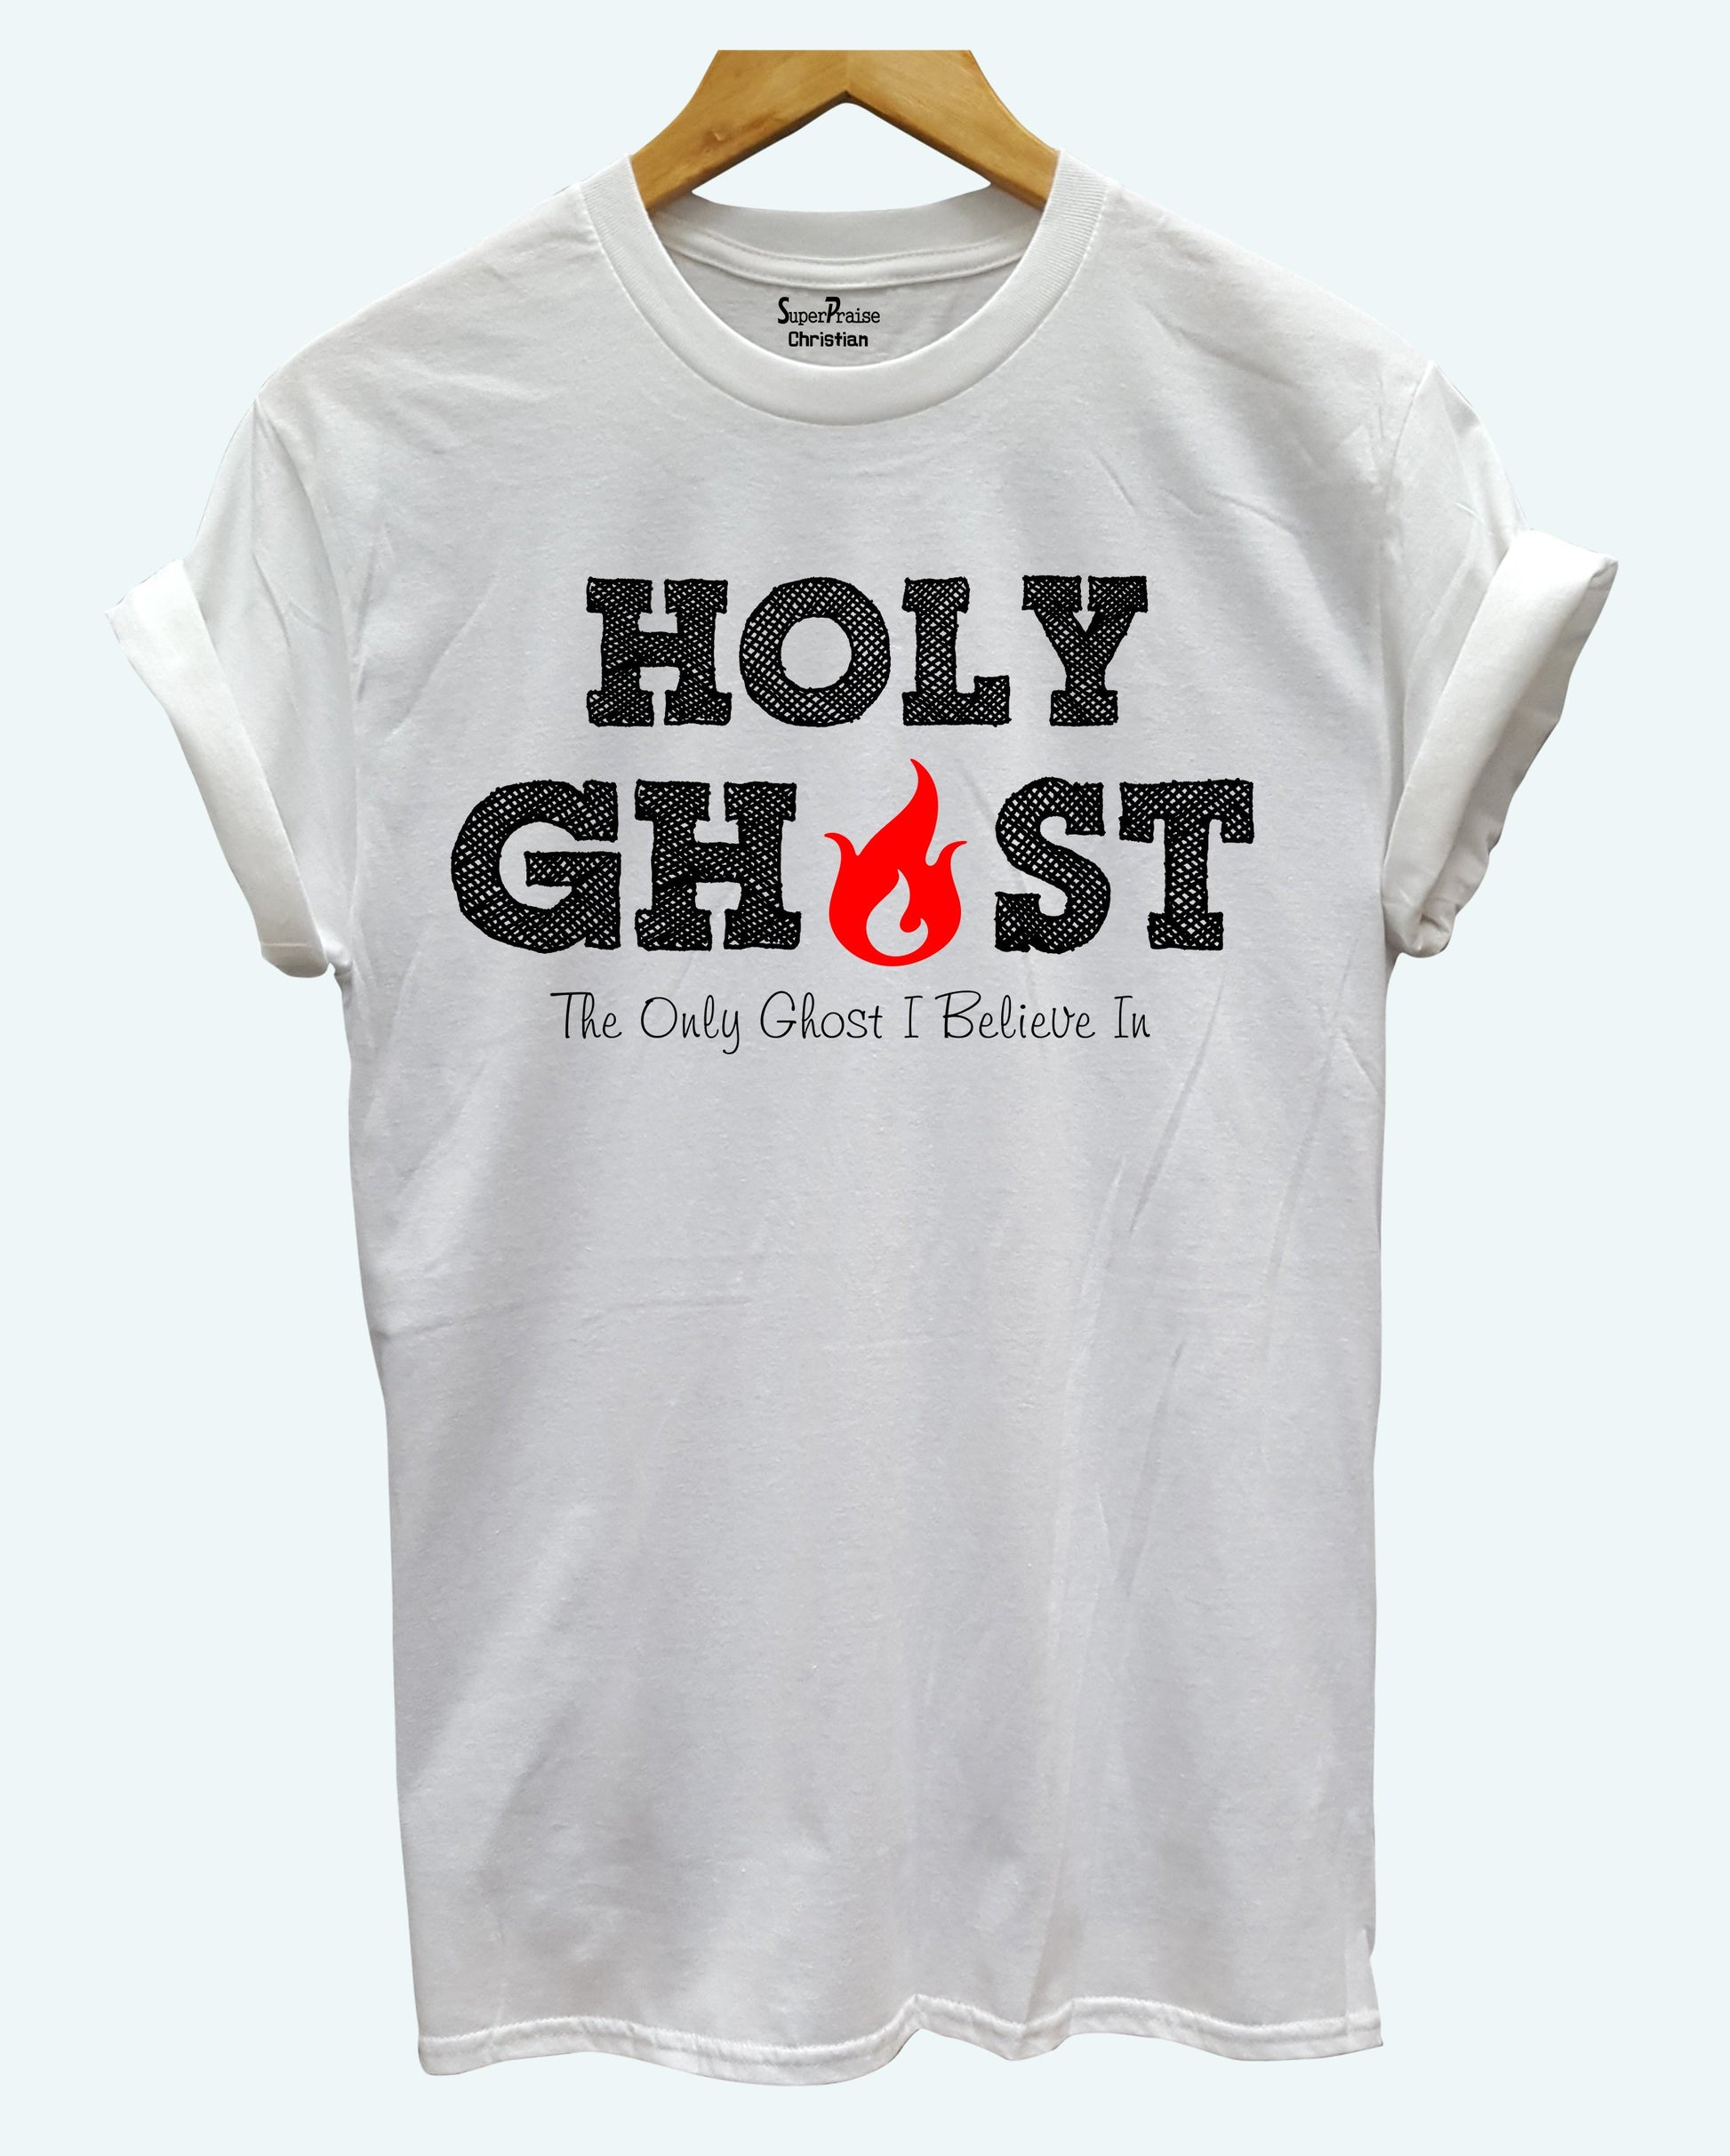 Holy Ghost T Shirt